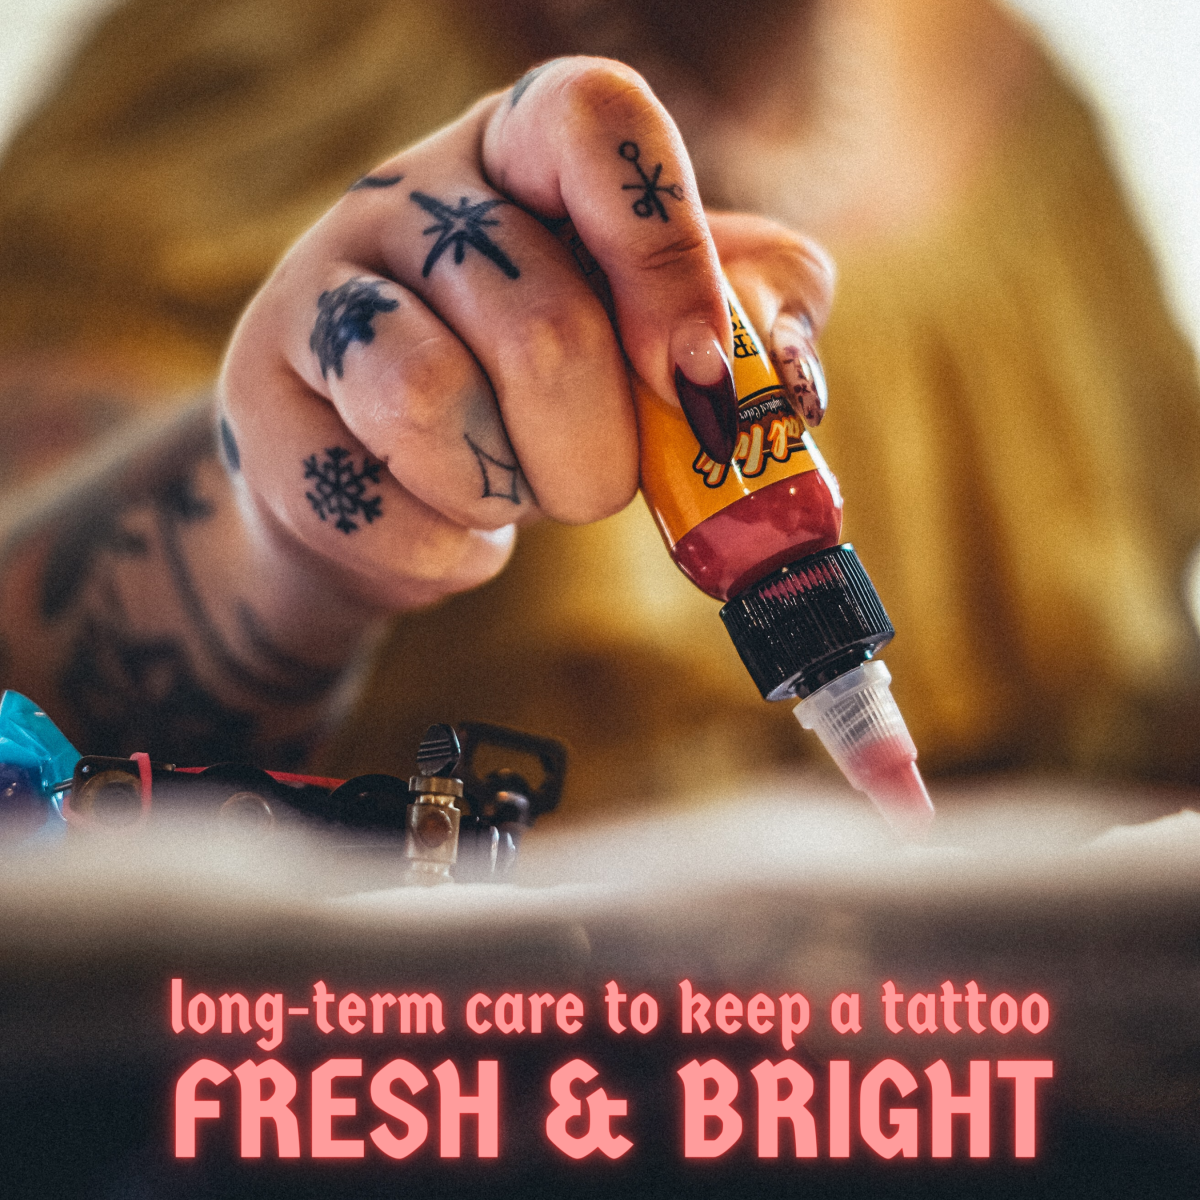 Long-term care to keep a tattoo fresh and bright.